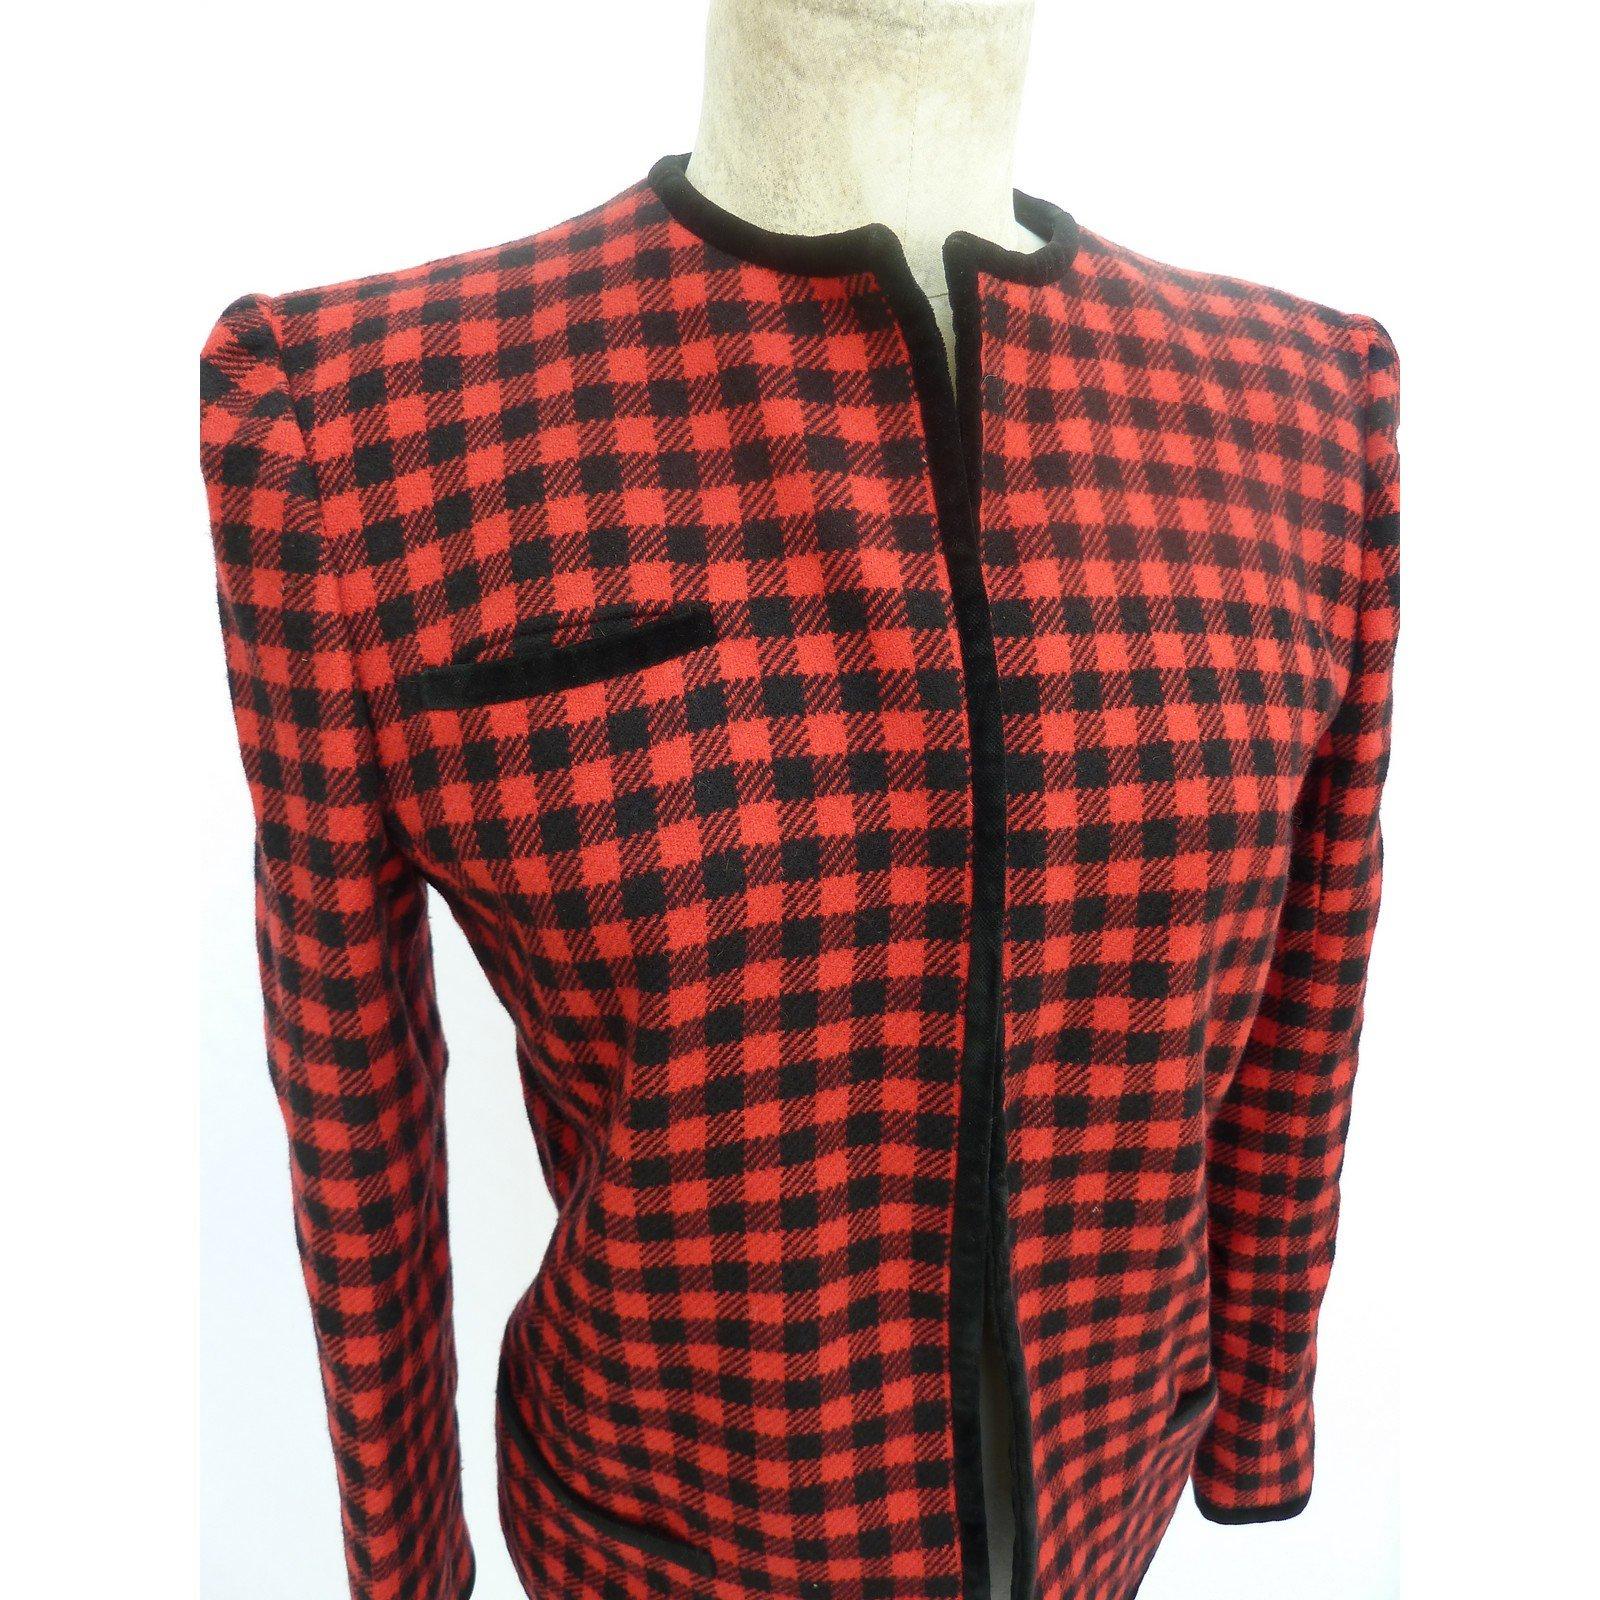 Valentino Boutique vintage 80s wool check red and black jacket. Velvet inserts along the edges, two side pockets and a chest pocket. Slim fit model. Excellent vintage condition.

Size: 40 IT 6 US 8 UK

Shoulder: 44 cm
Bust/Chest: 48 cm
Sleeve: 56